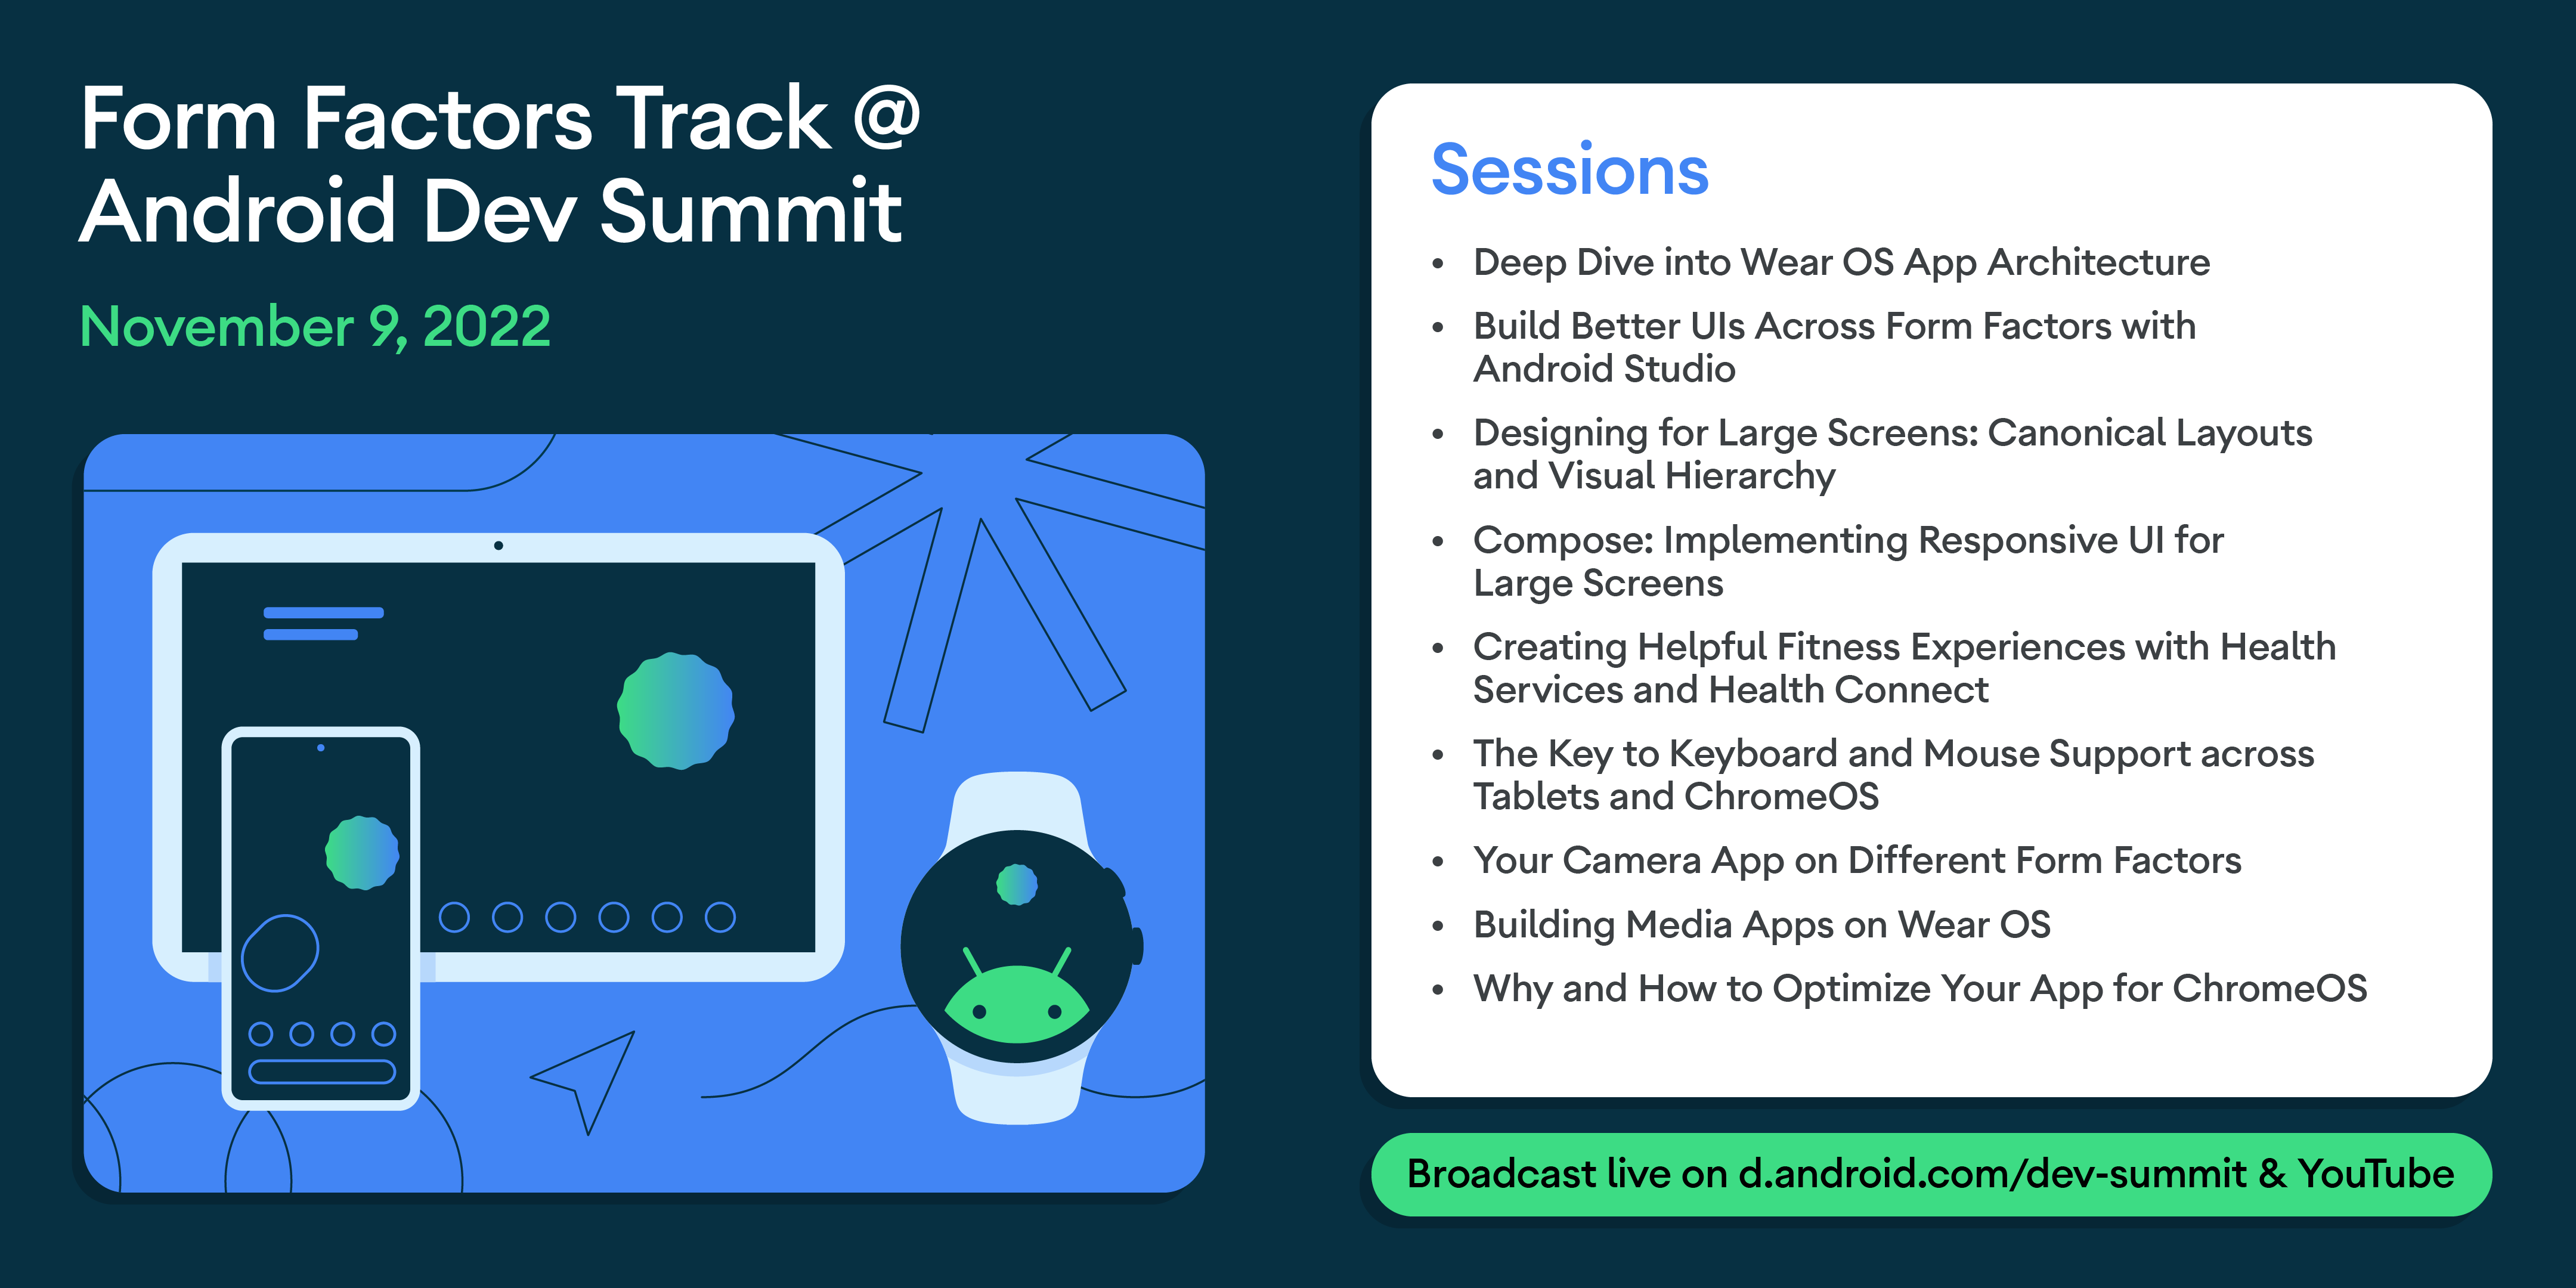 Form Factors Track @ Android Dev Summit November 9, 2022 
Sessions: Deep Dive into Wear OS App Architecture, Build Better Uls Across Form Factors with Android Studio, Designing for Large Screens: Canonical Layouts and Visual Hierarchy Compose: Implementing Responsive UI for Large Screens, Creating Helpful Fitness Experiences with Health Services and Health Connect, The Key to Keyboard and Mouse Support across Tablets and ChromeOS Your Camera App on Different Form Factors,  Building Media Apps on Wear OS,  Why and How to Optimize Your App for ChromeOS. 
Broadcast live on d.android.com/dev-summit & YouTube.